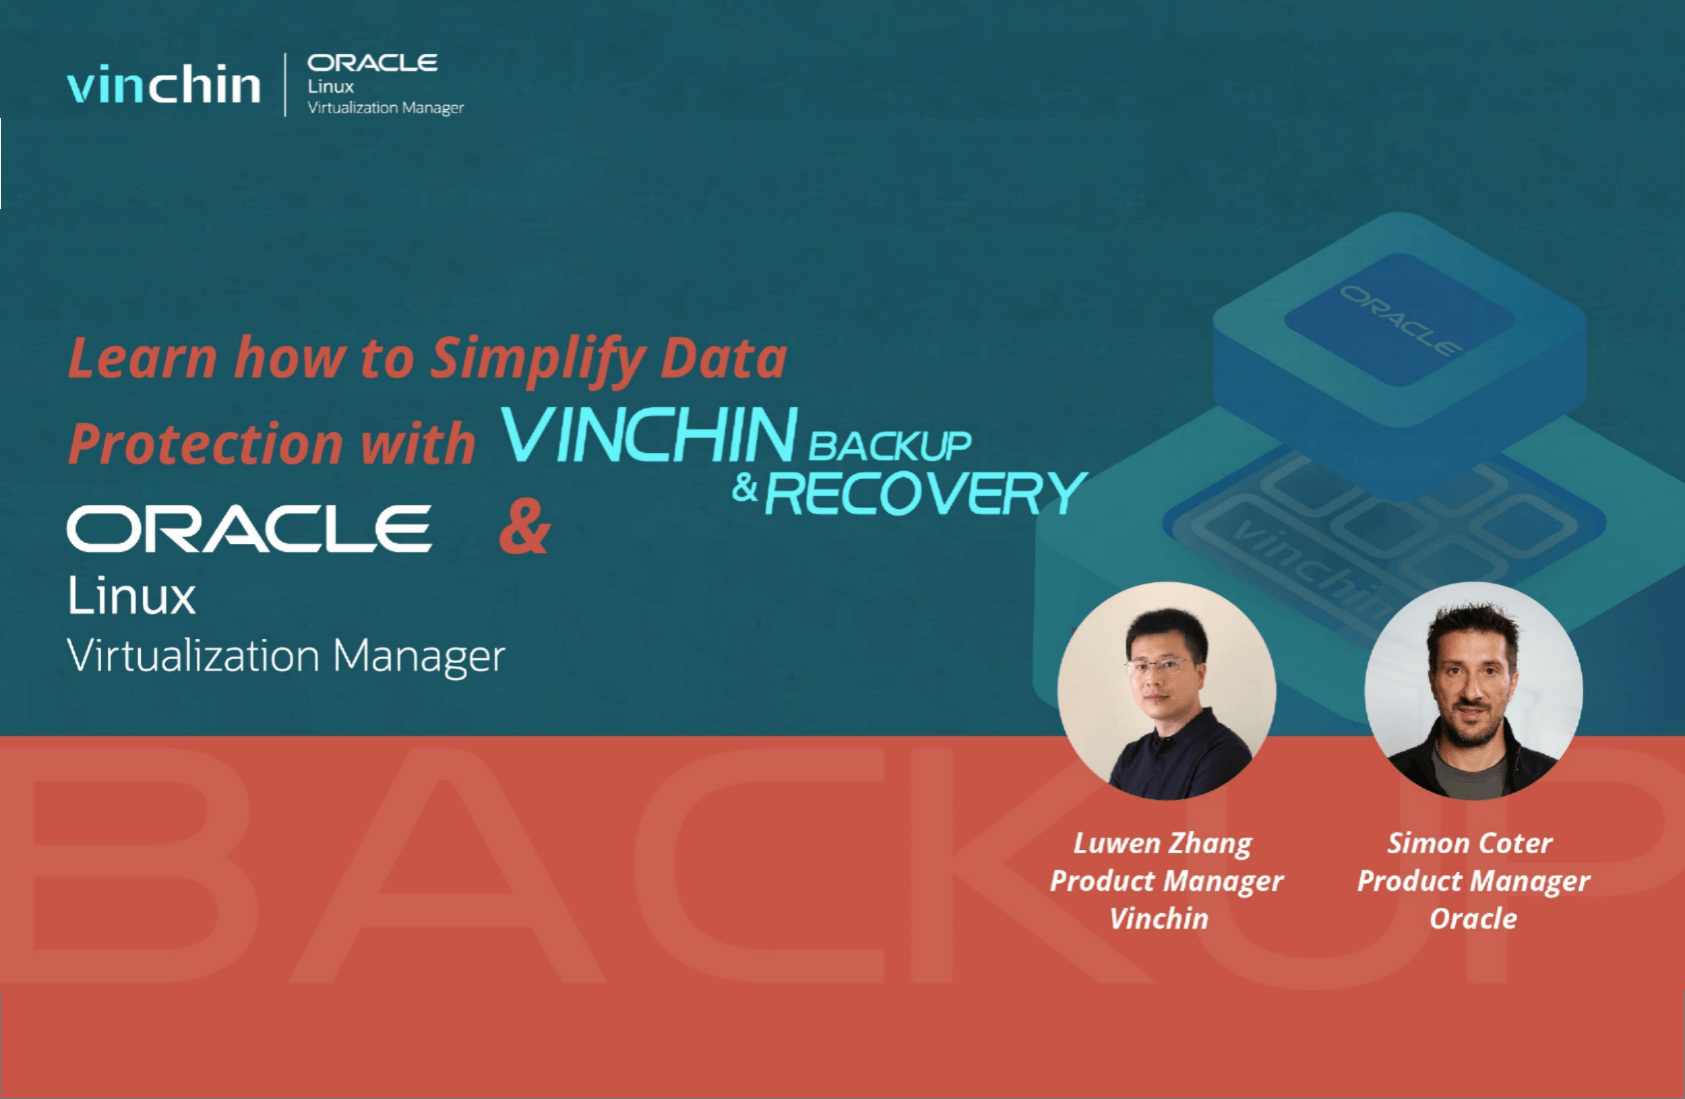 Vinchin × Oracle | Learn How to Simplify Data Protection with Vinchin Backup & Recovery and Oracle Linux Virtualization Manager